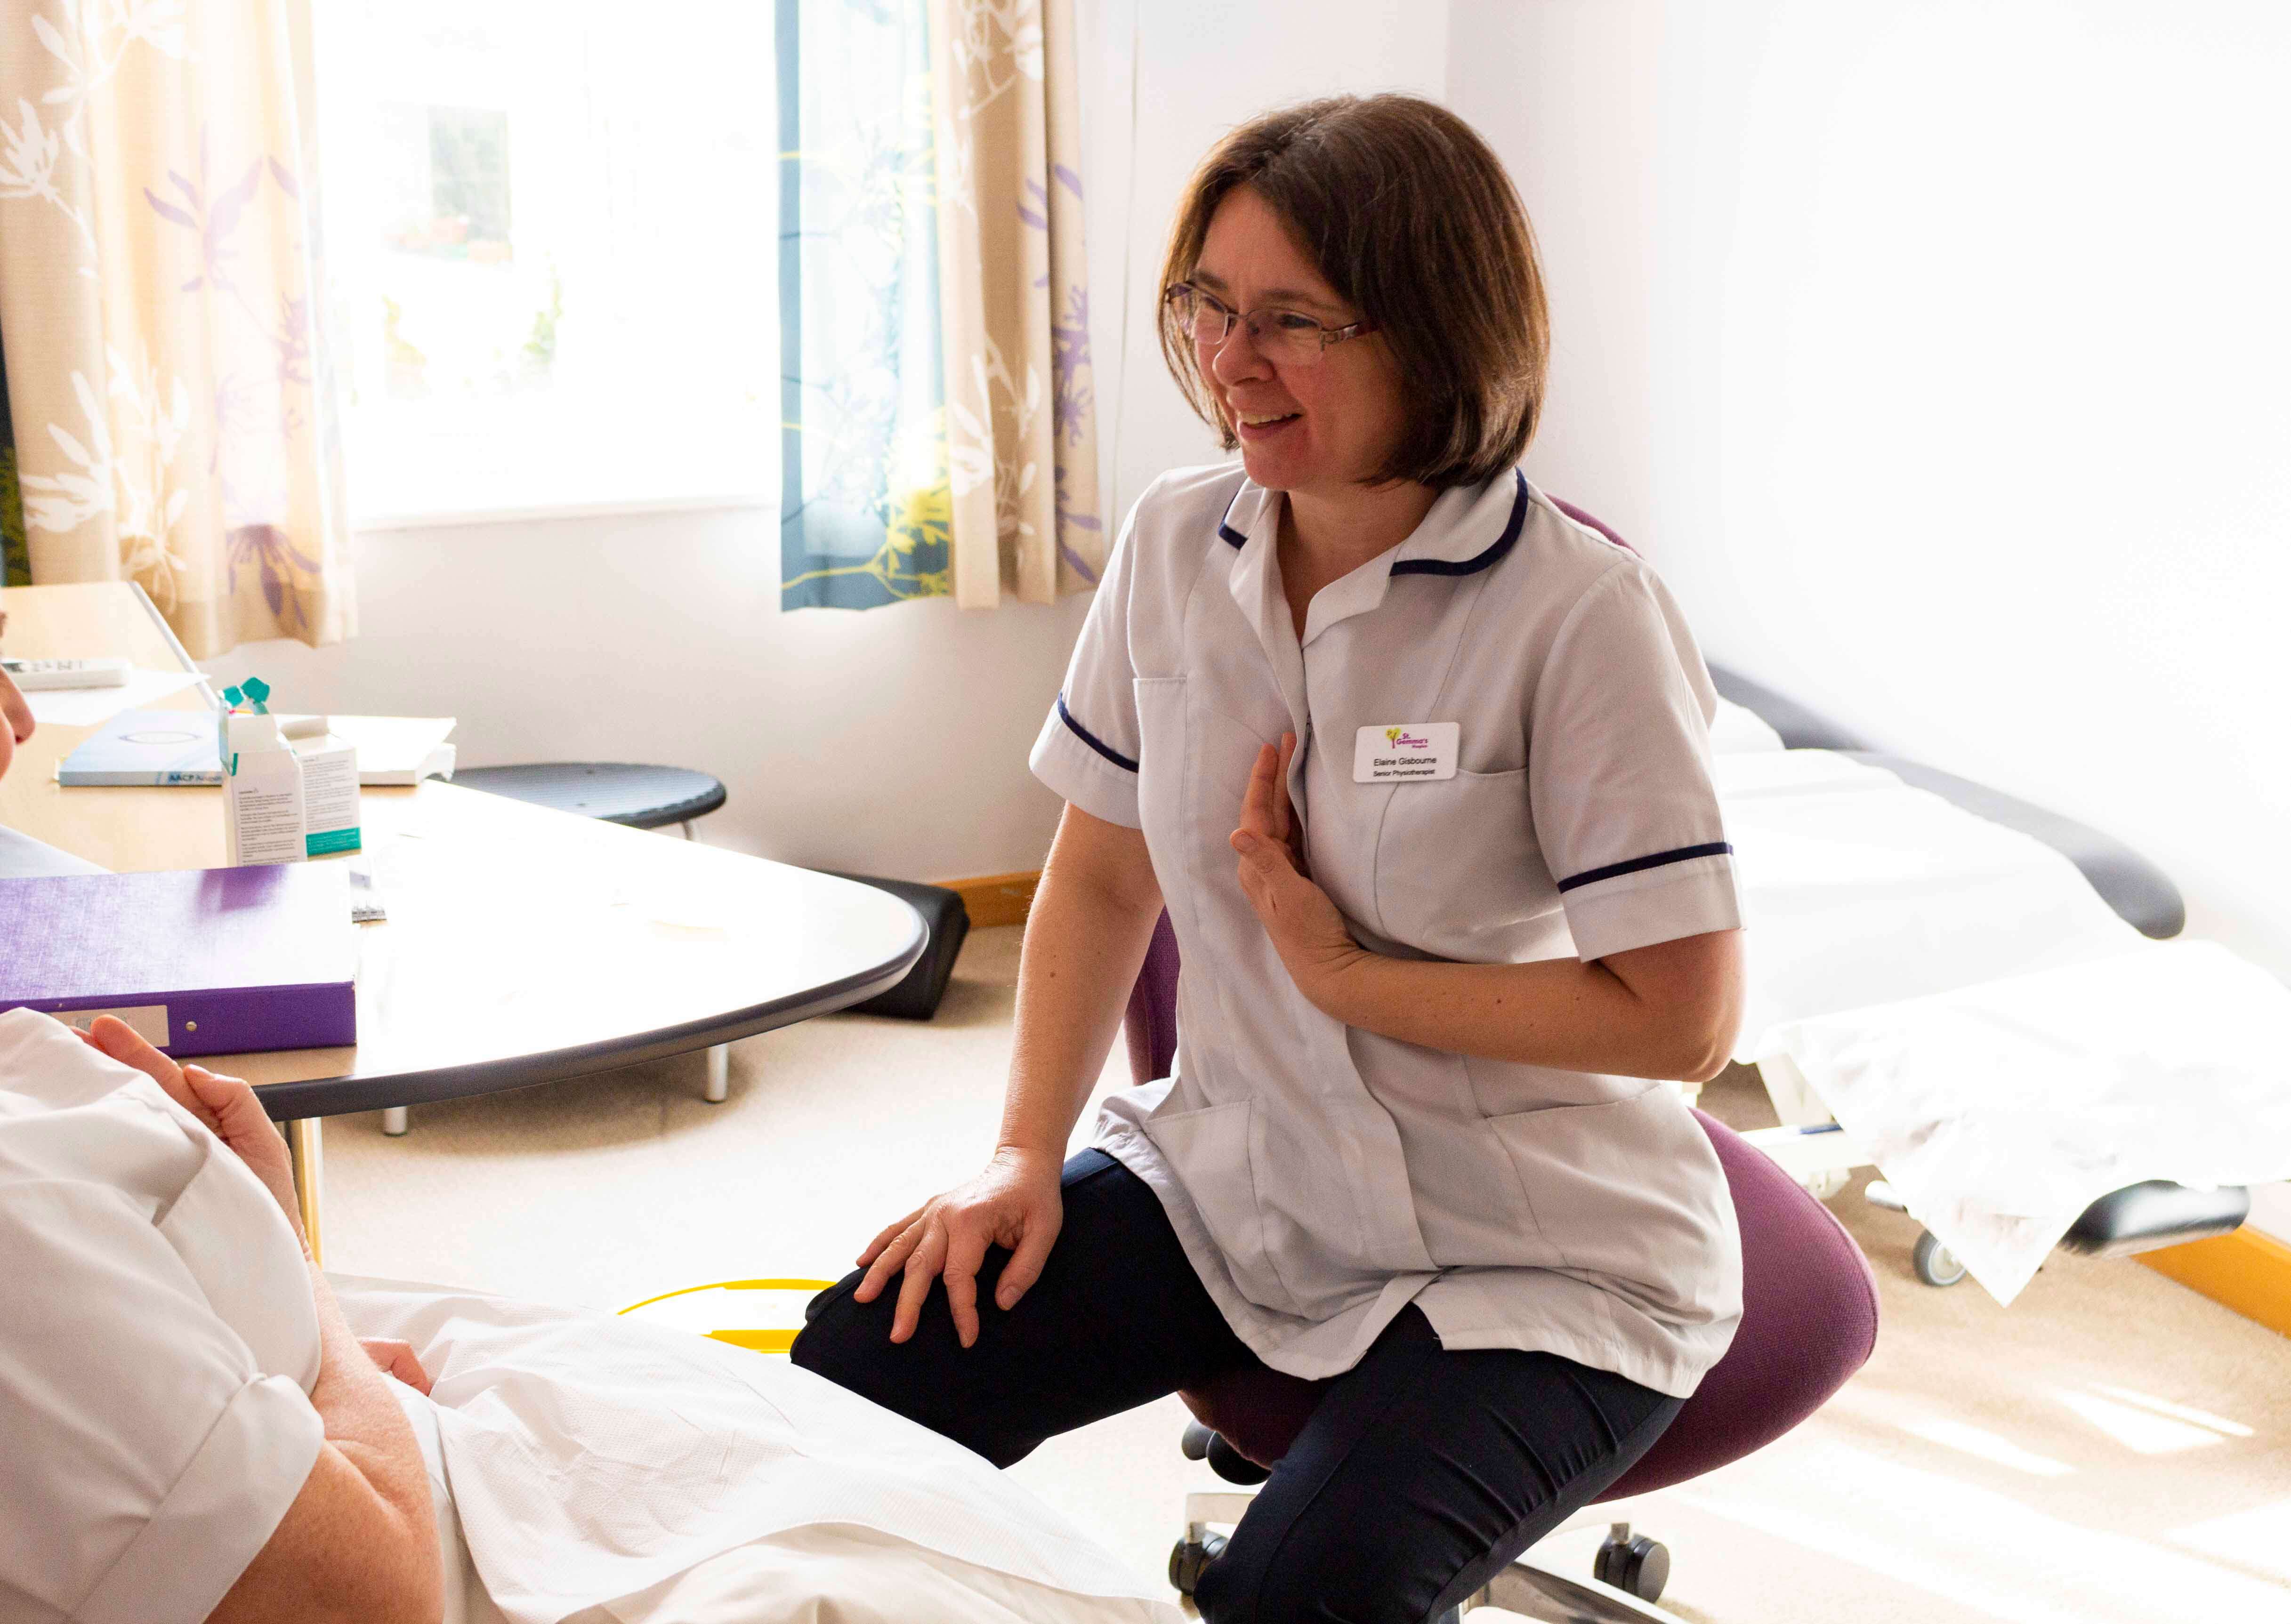 Smiling physiotherapist demonstrating an exercise to a patient